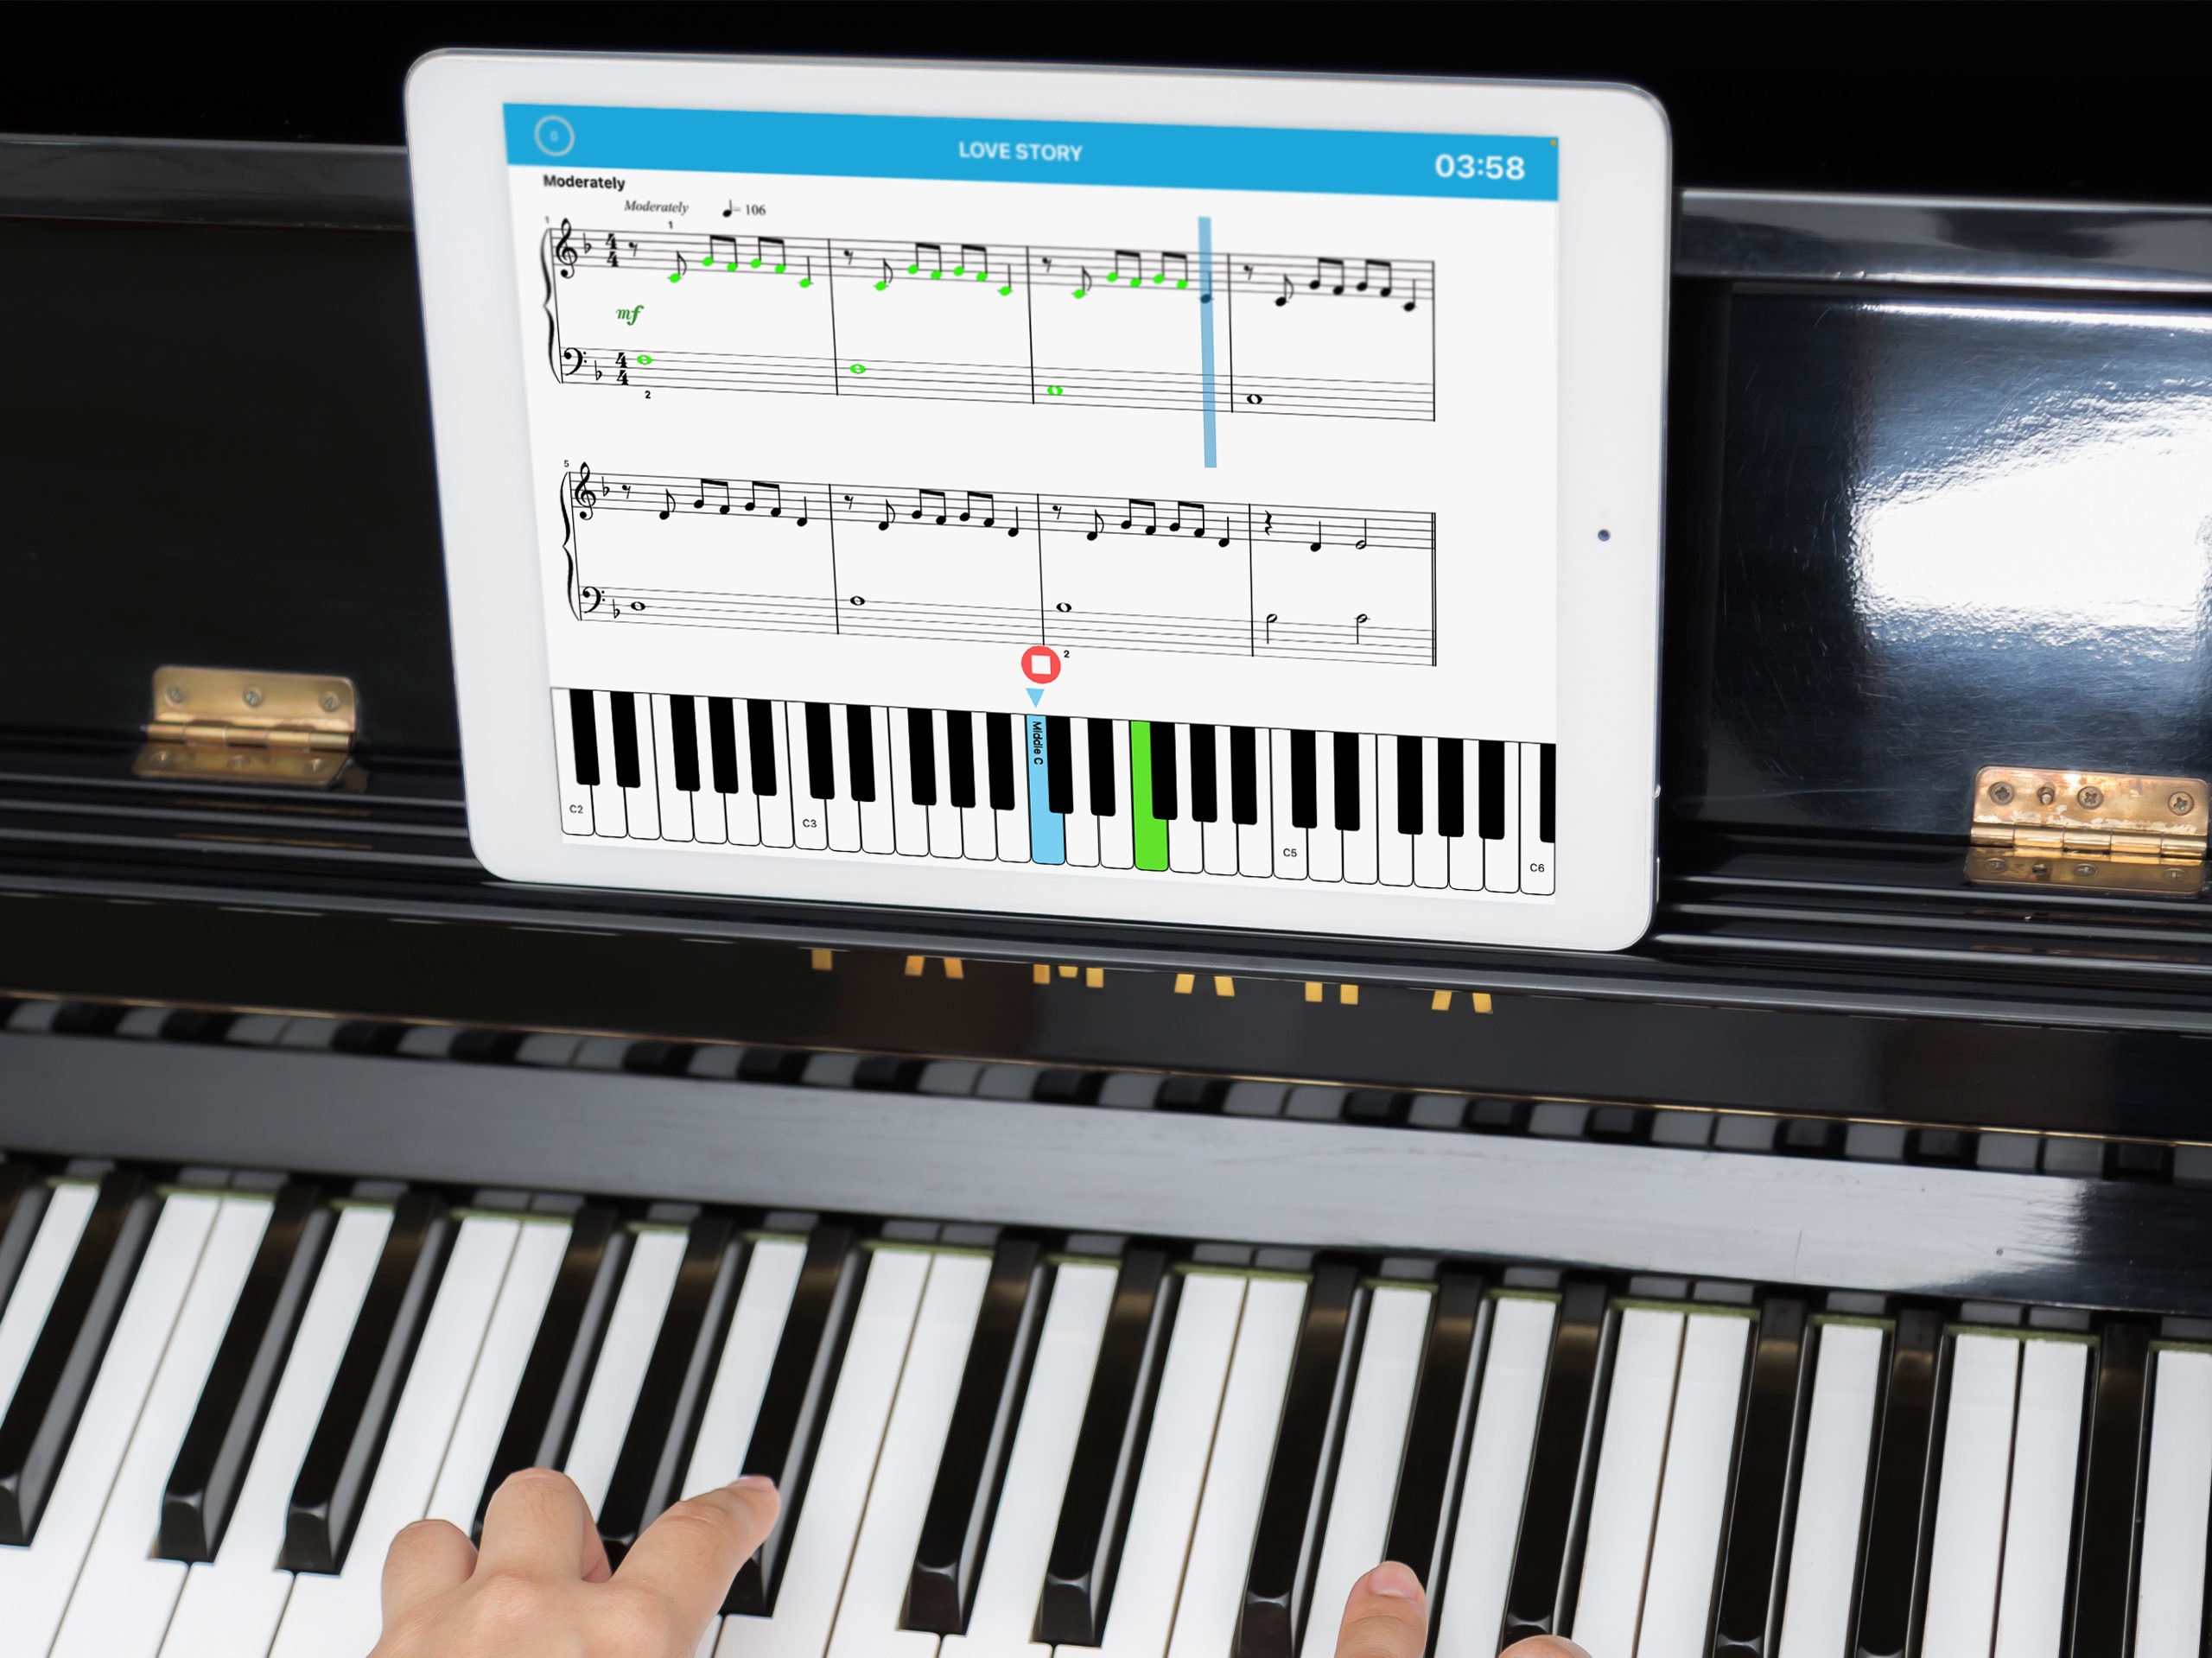 Piano Marvel being used on an iPad